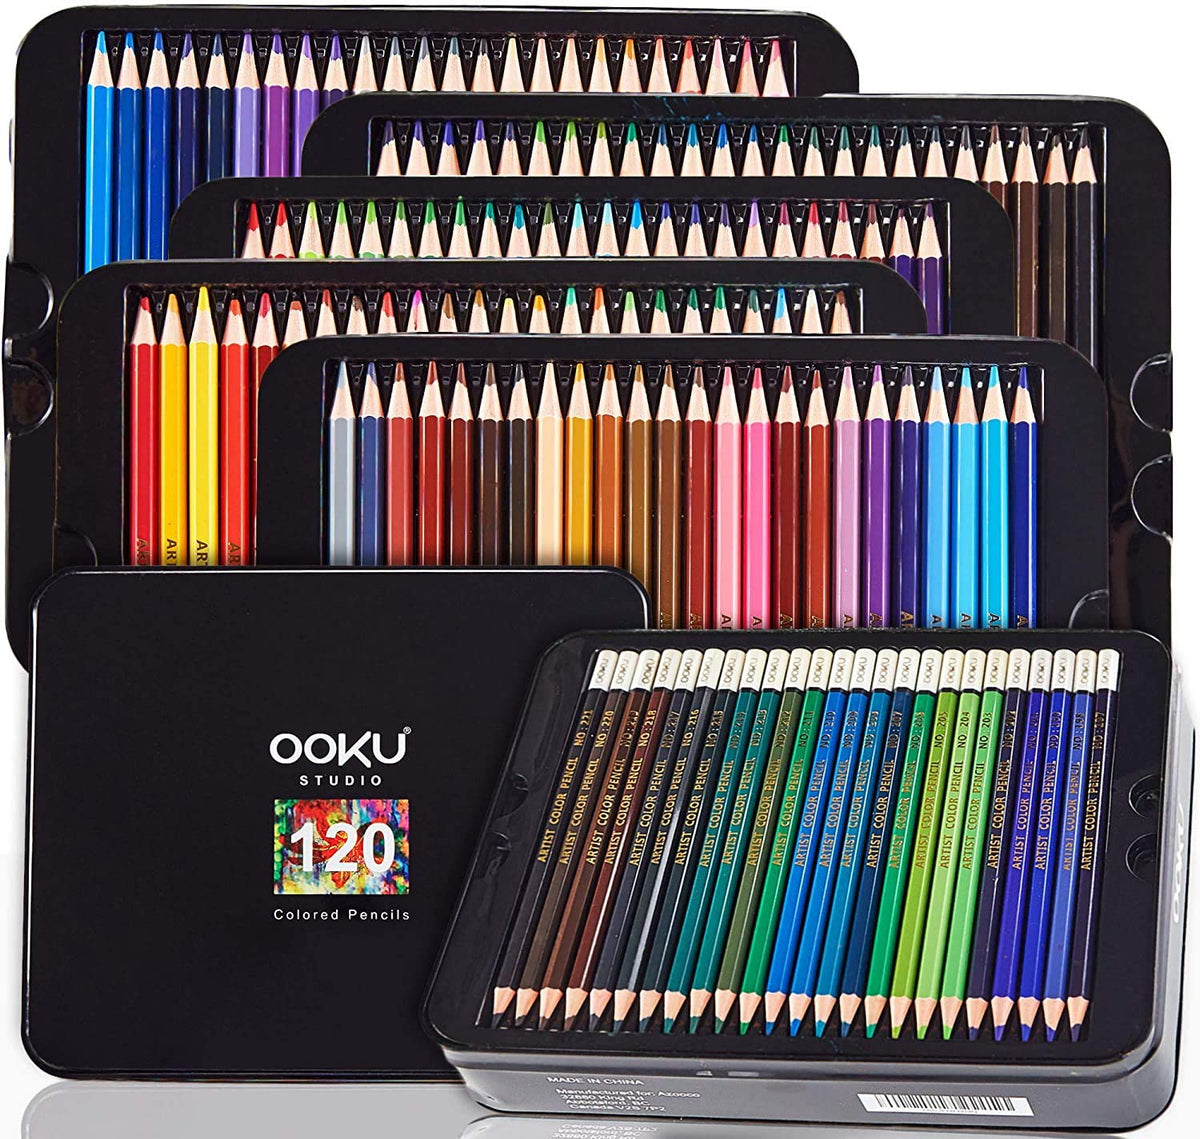 Yover 120 Premium Art Colored Pencil Set,Drawing and Coloring Pencil for  Sketching, Shading, Ideal for Artists,Adults and Kids